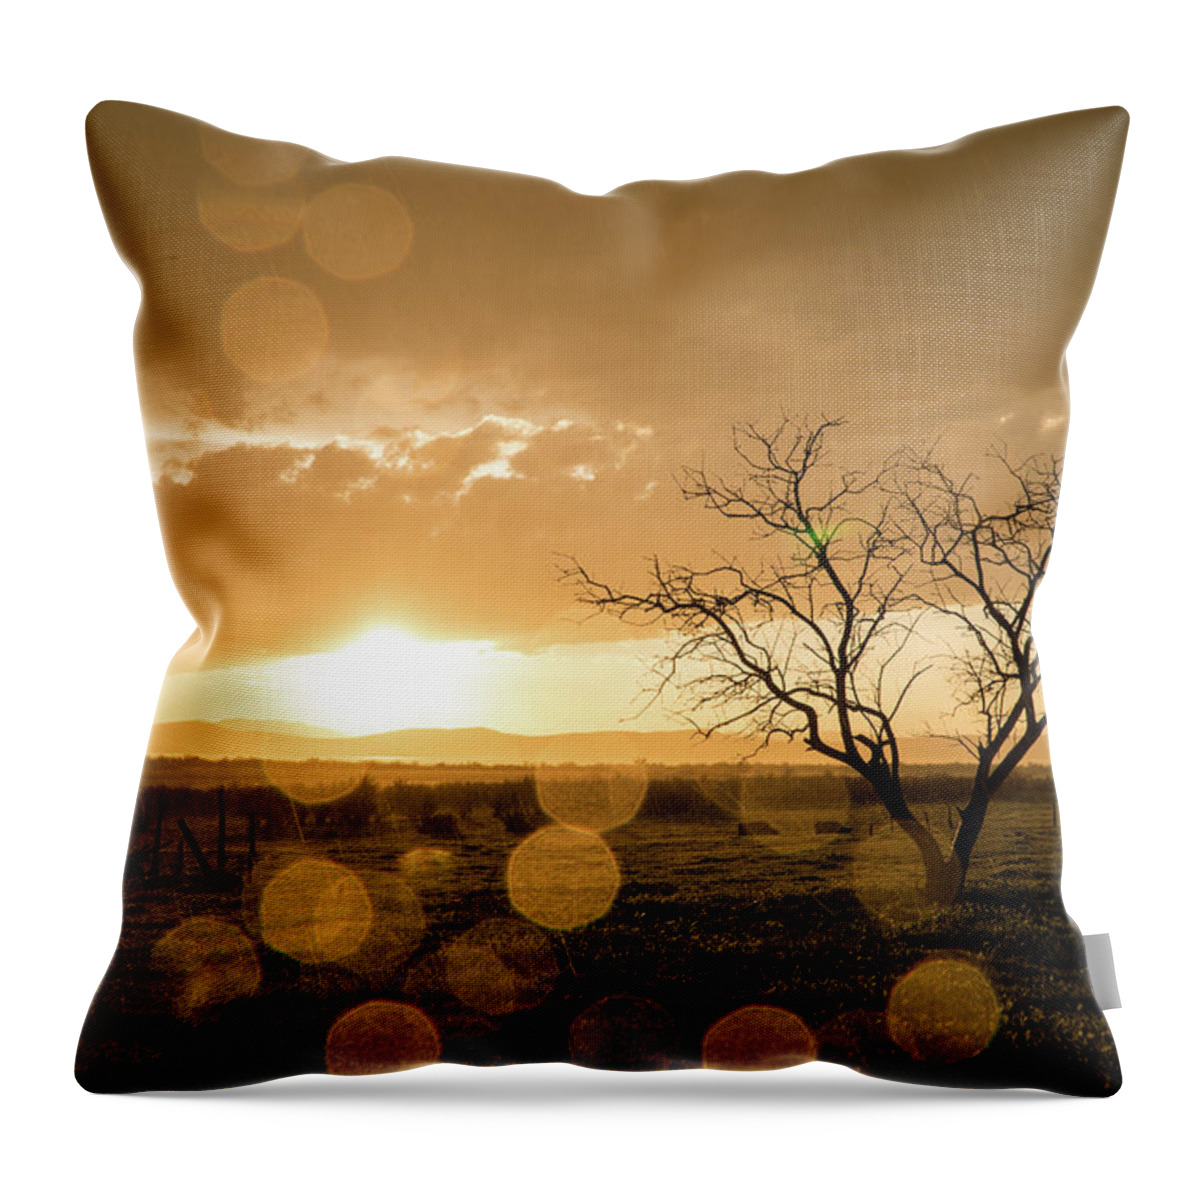 Sunset Throw Pillow featuring the photograph Tree Sunset by Wesley Aston